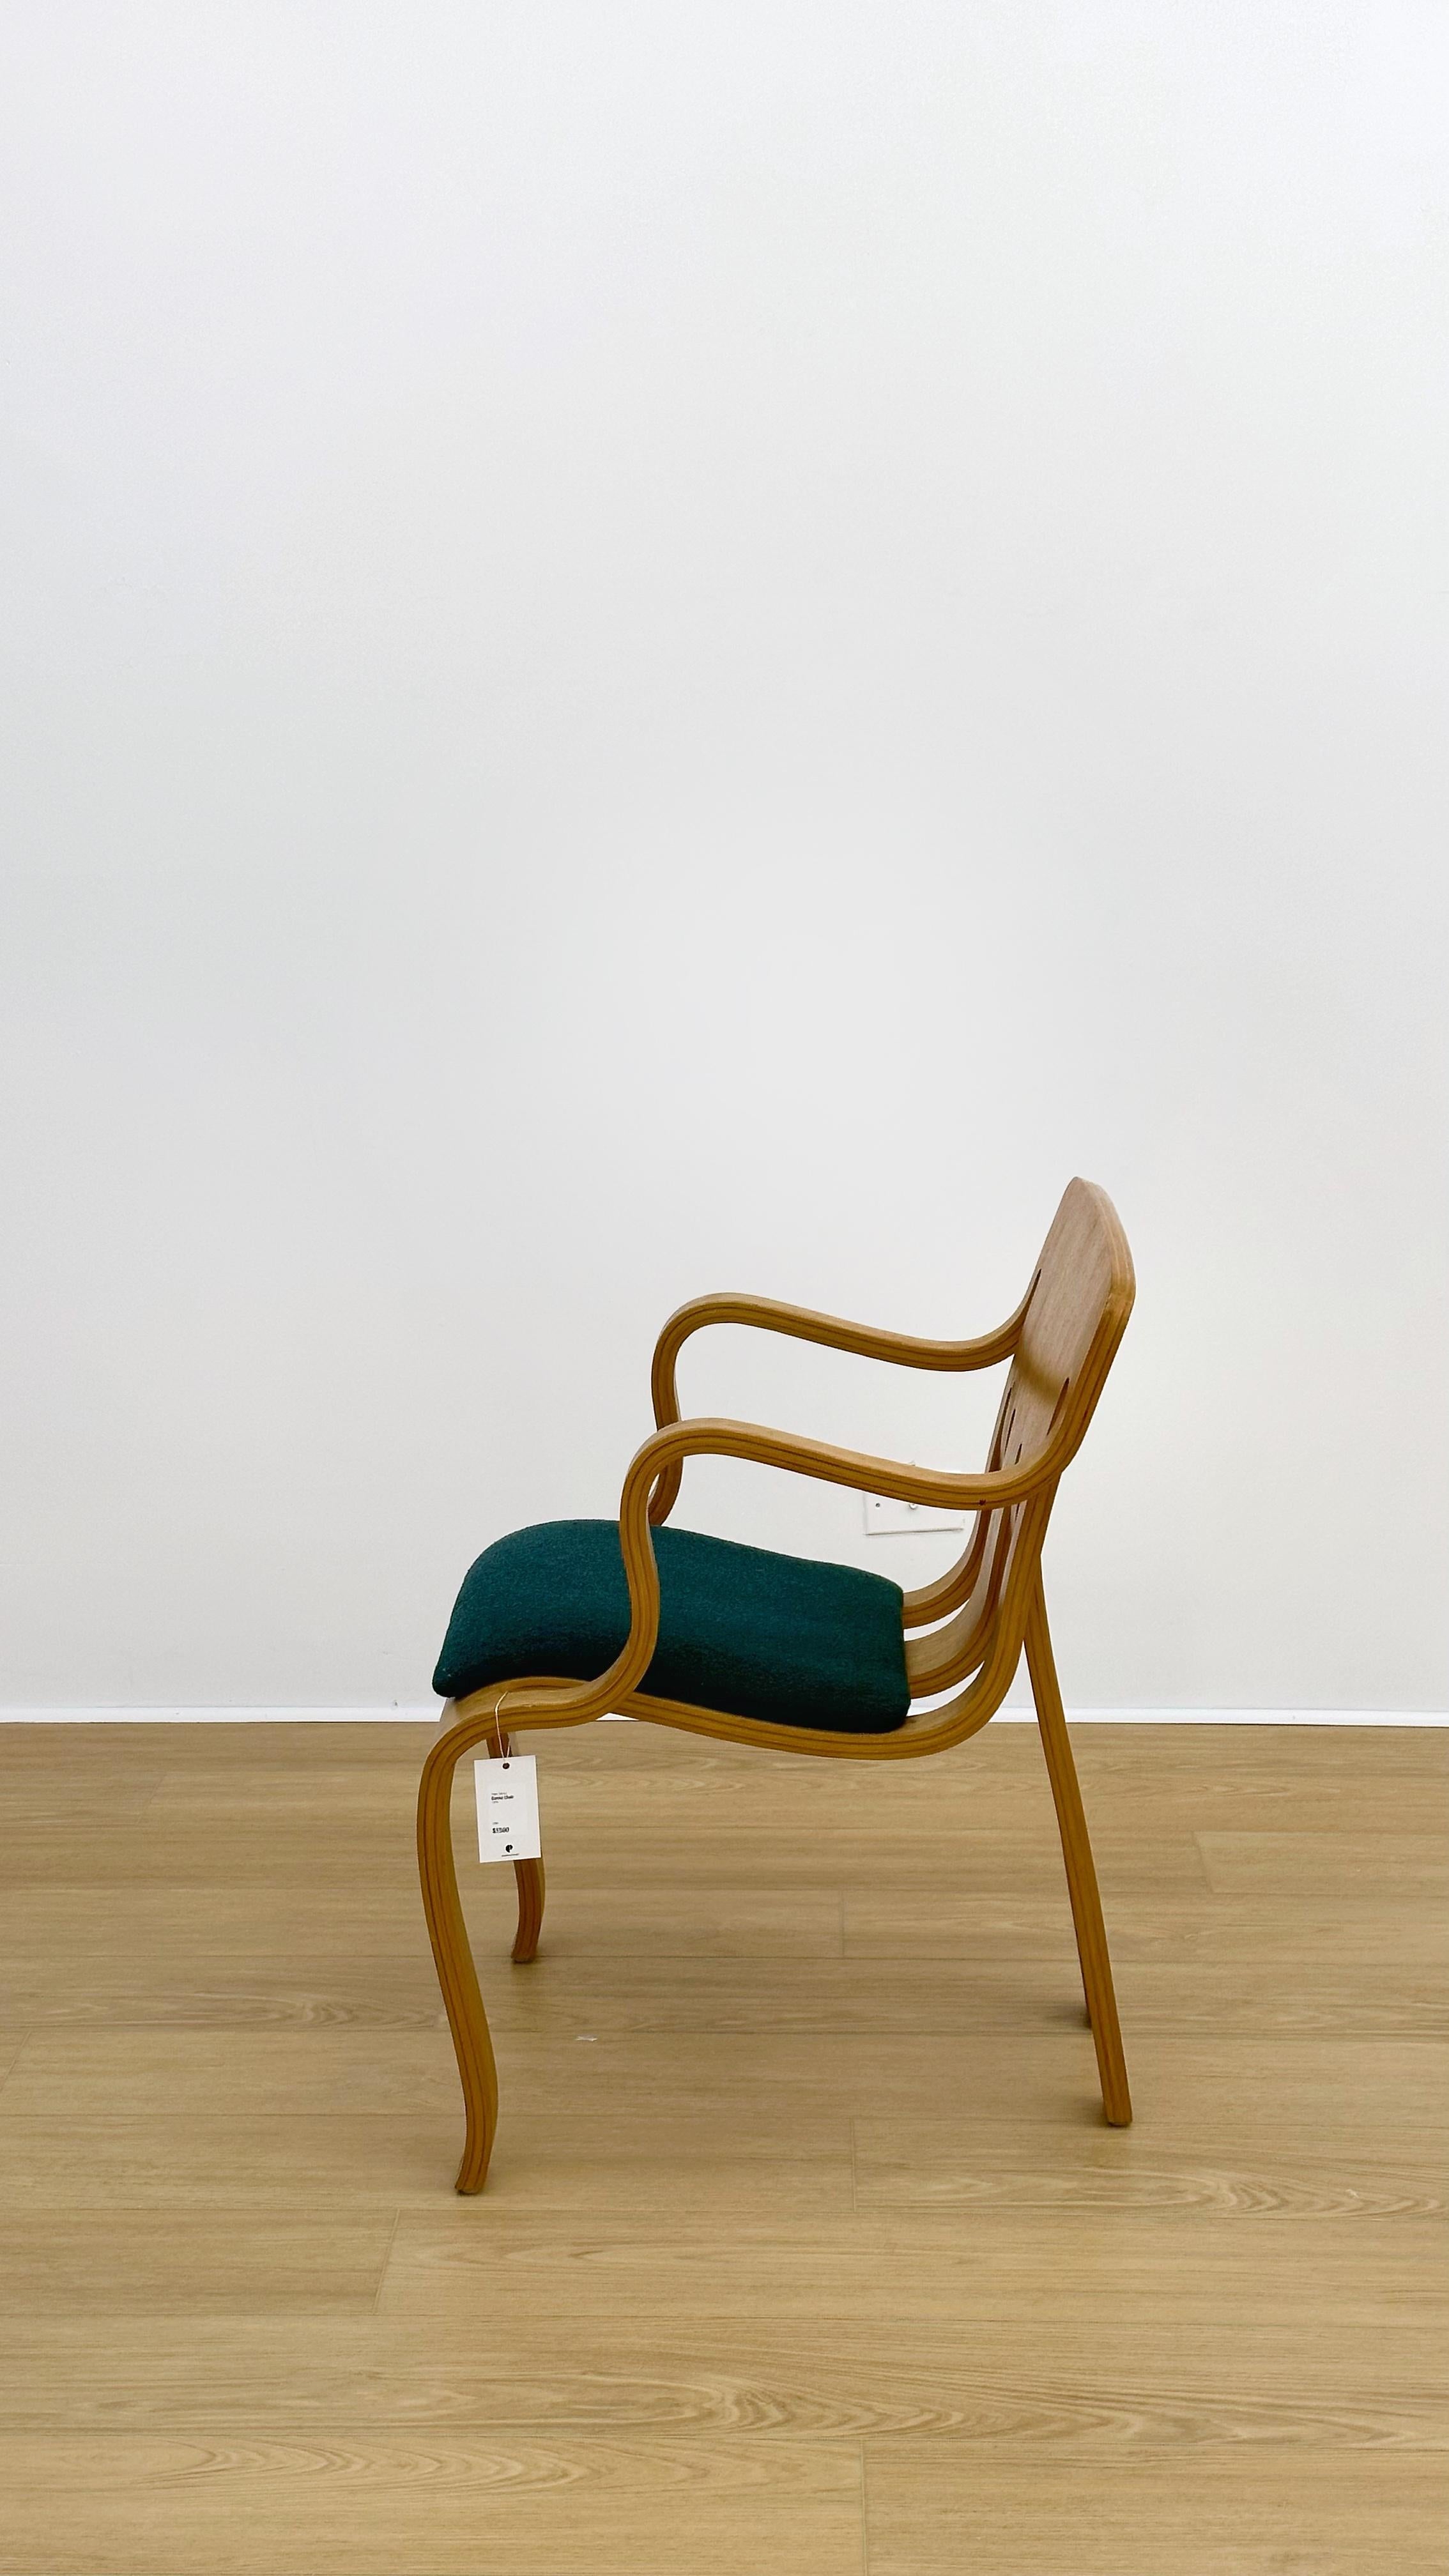 USA, 1978. Molded from a single sheet of maple plywood. Peter Danko’s first chair of notoriety. 